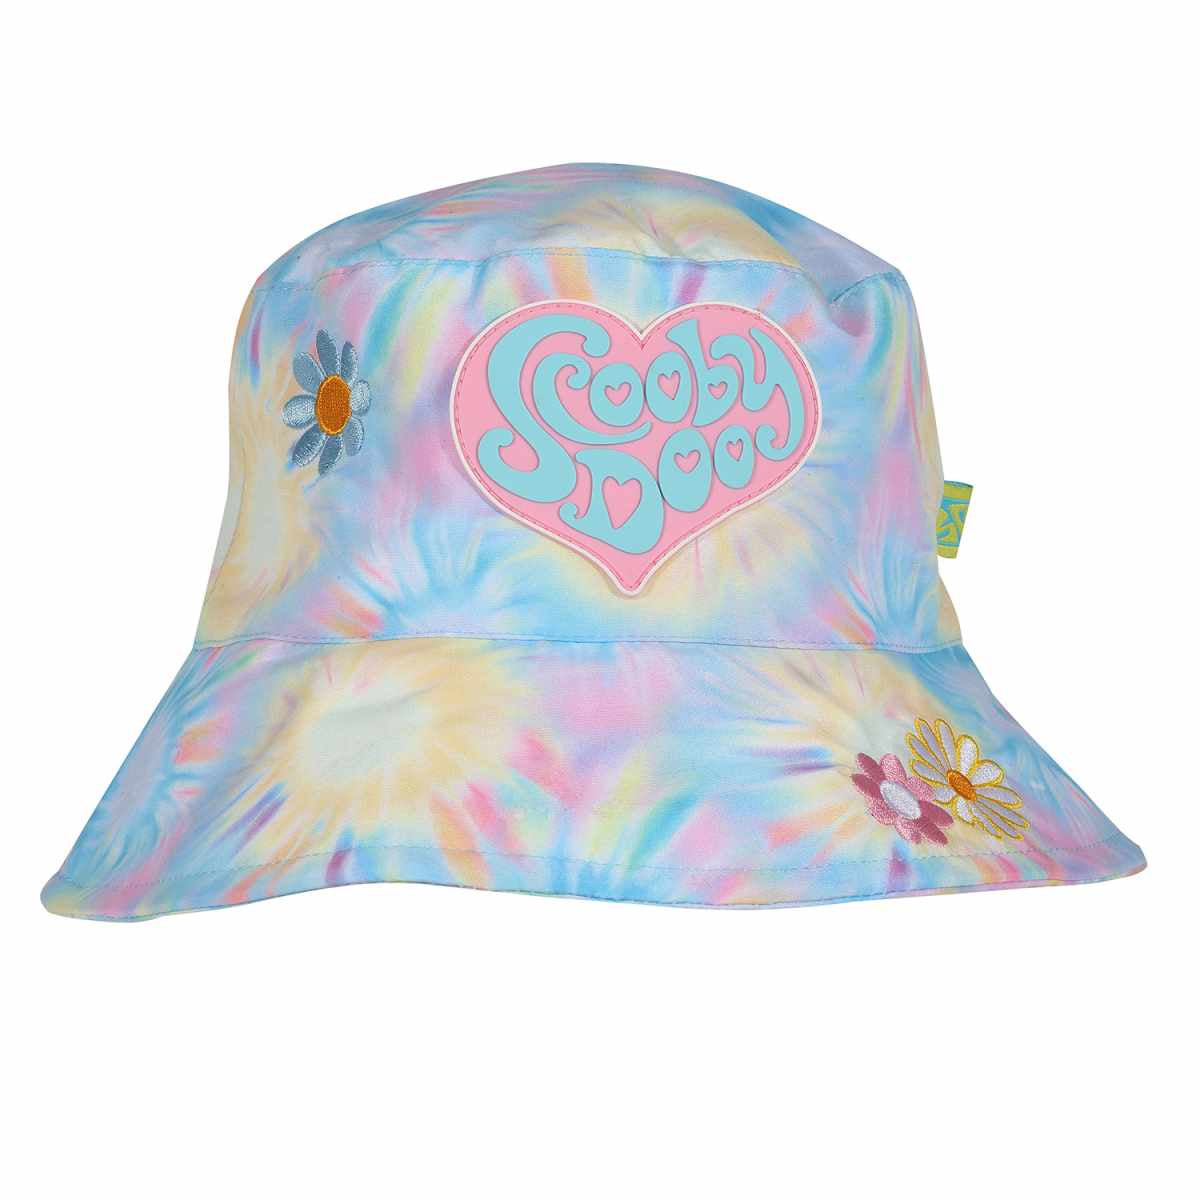 Colorful SCOOBY DOO themed tie-dye bucket hat with bright patterns